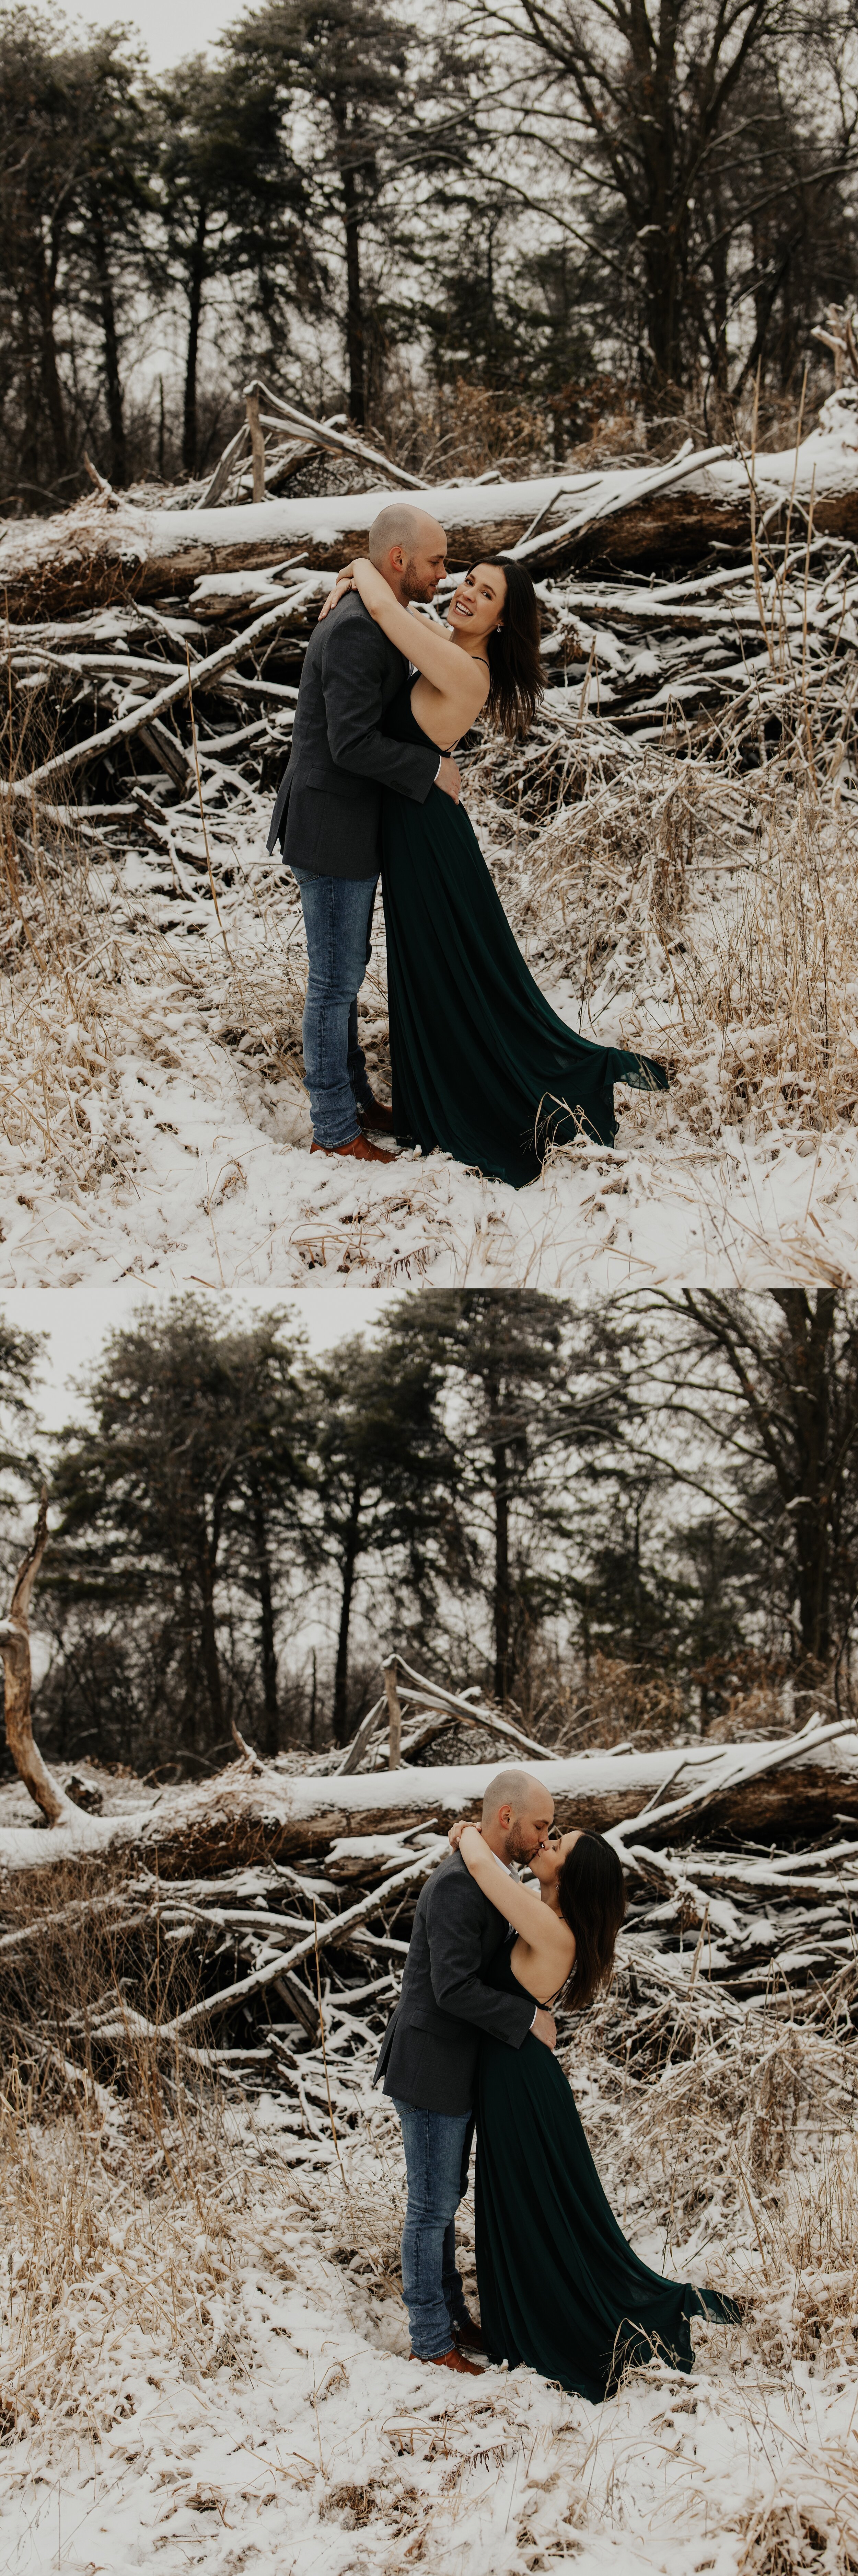 jessika-christine-photography-outdoor-engagement-couples-snow-adventurous-session (1).jpg